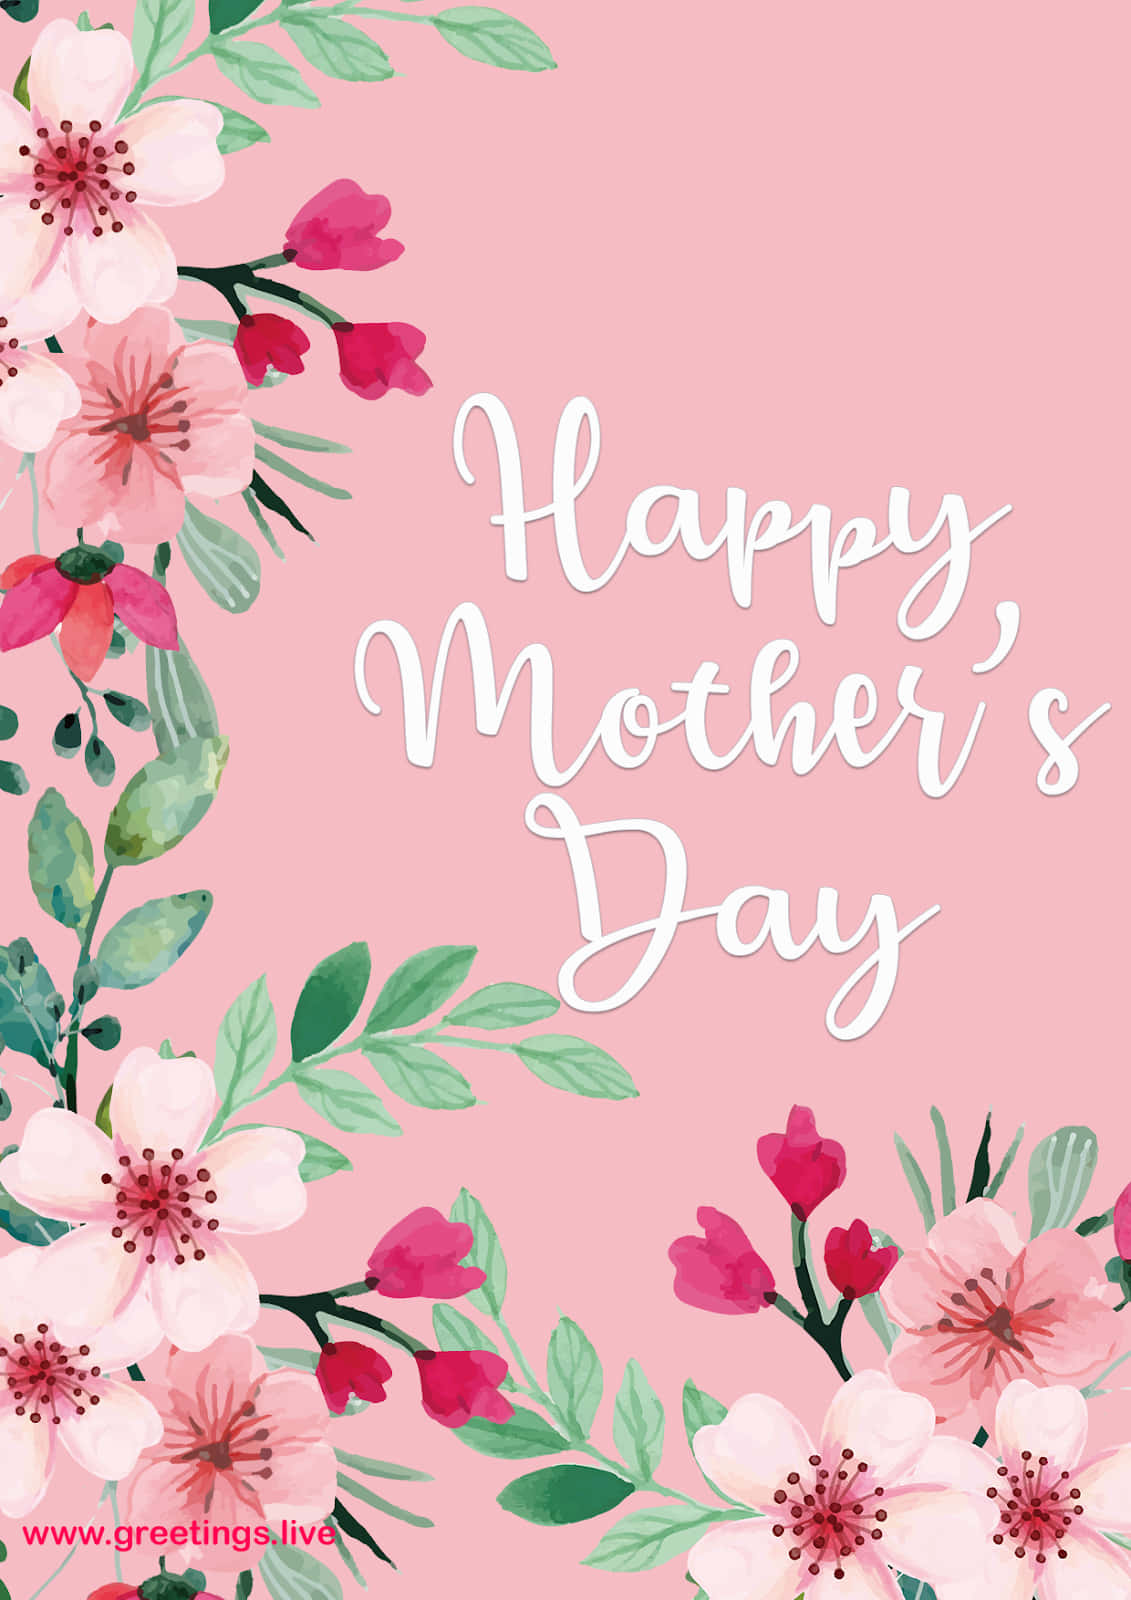 Download Happy Mother's Day Images